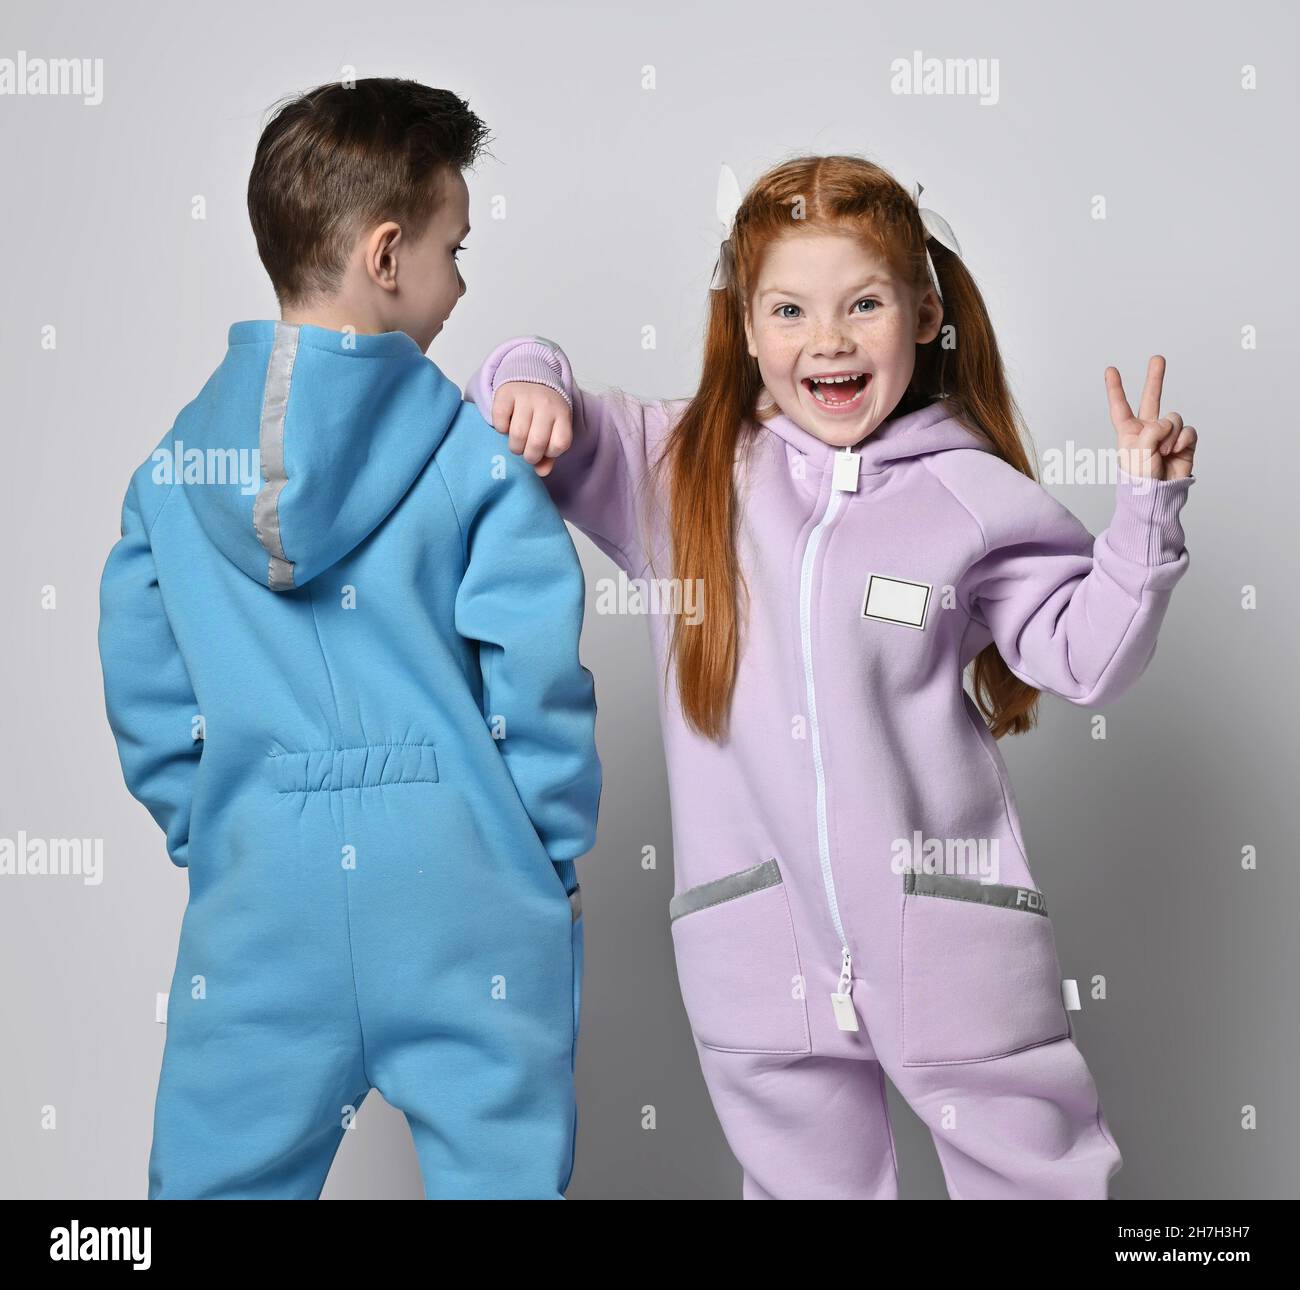 Frolic kids in blue and pink jumpsuits are standing next to each other, boy with his back to us and girl with her face Stock Photo